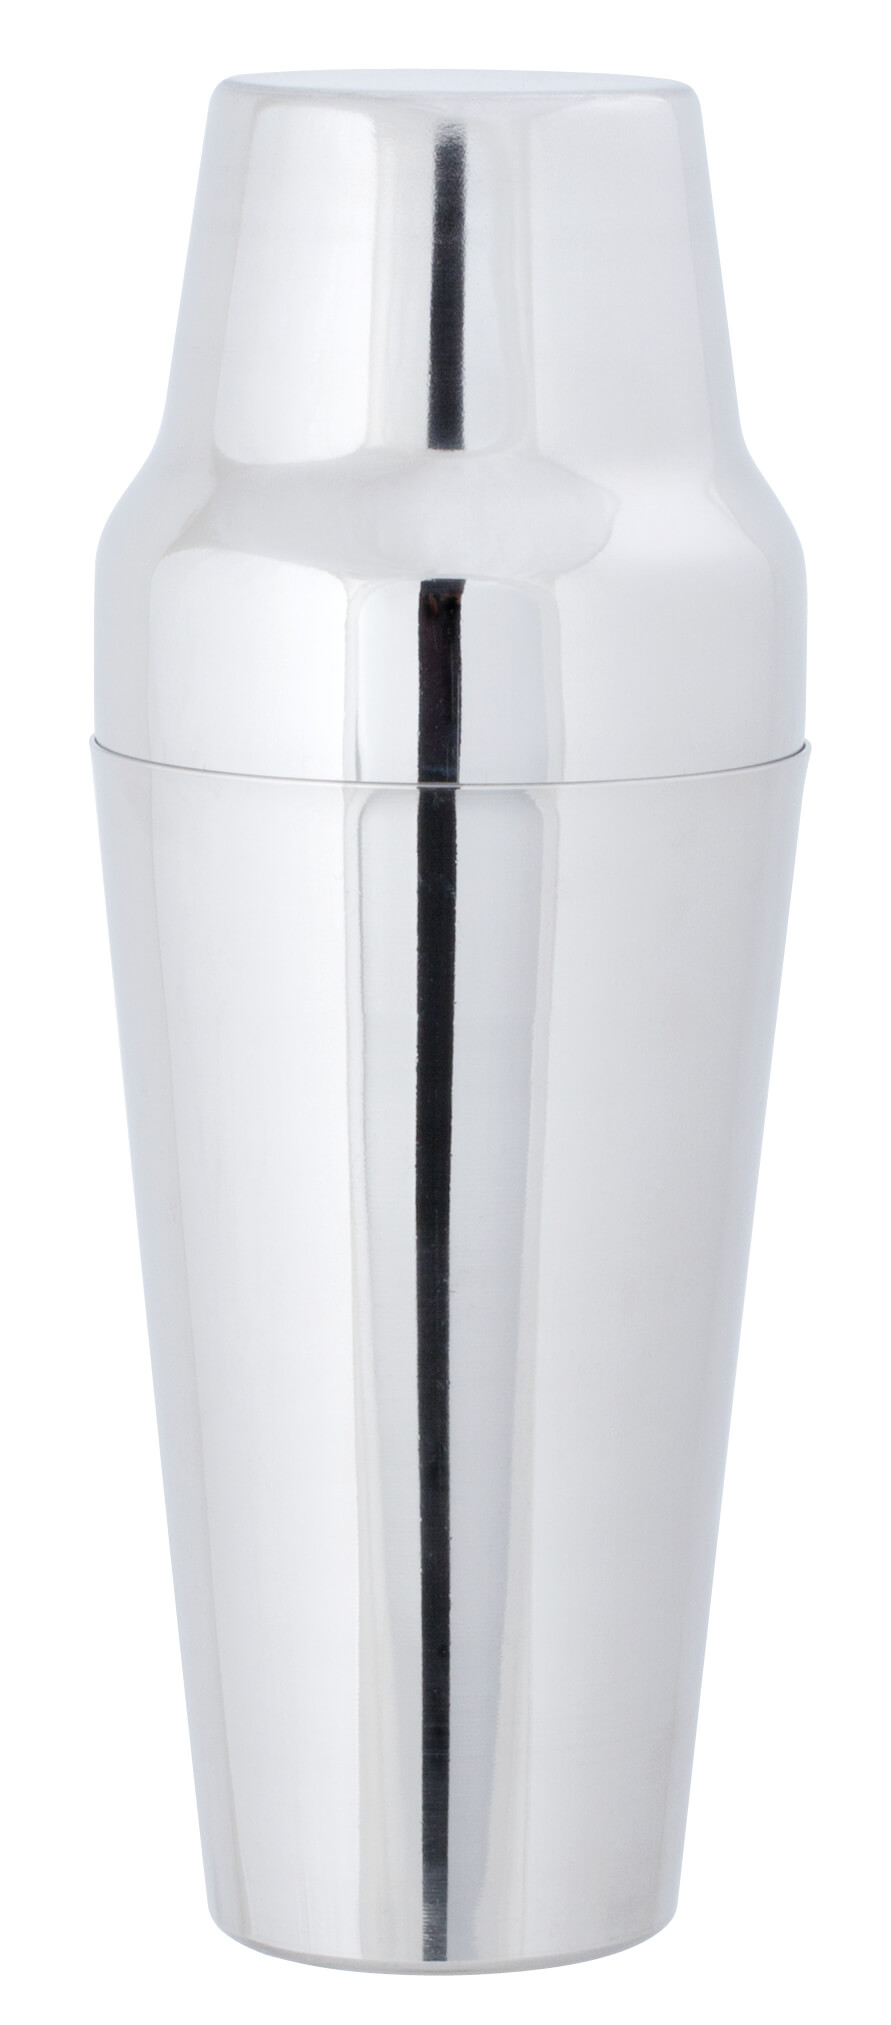 Cocktail-Shaker, stainless steel, twopartite, polished (900ml)